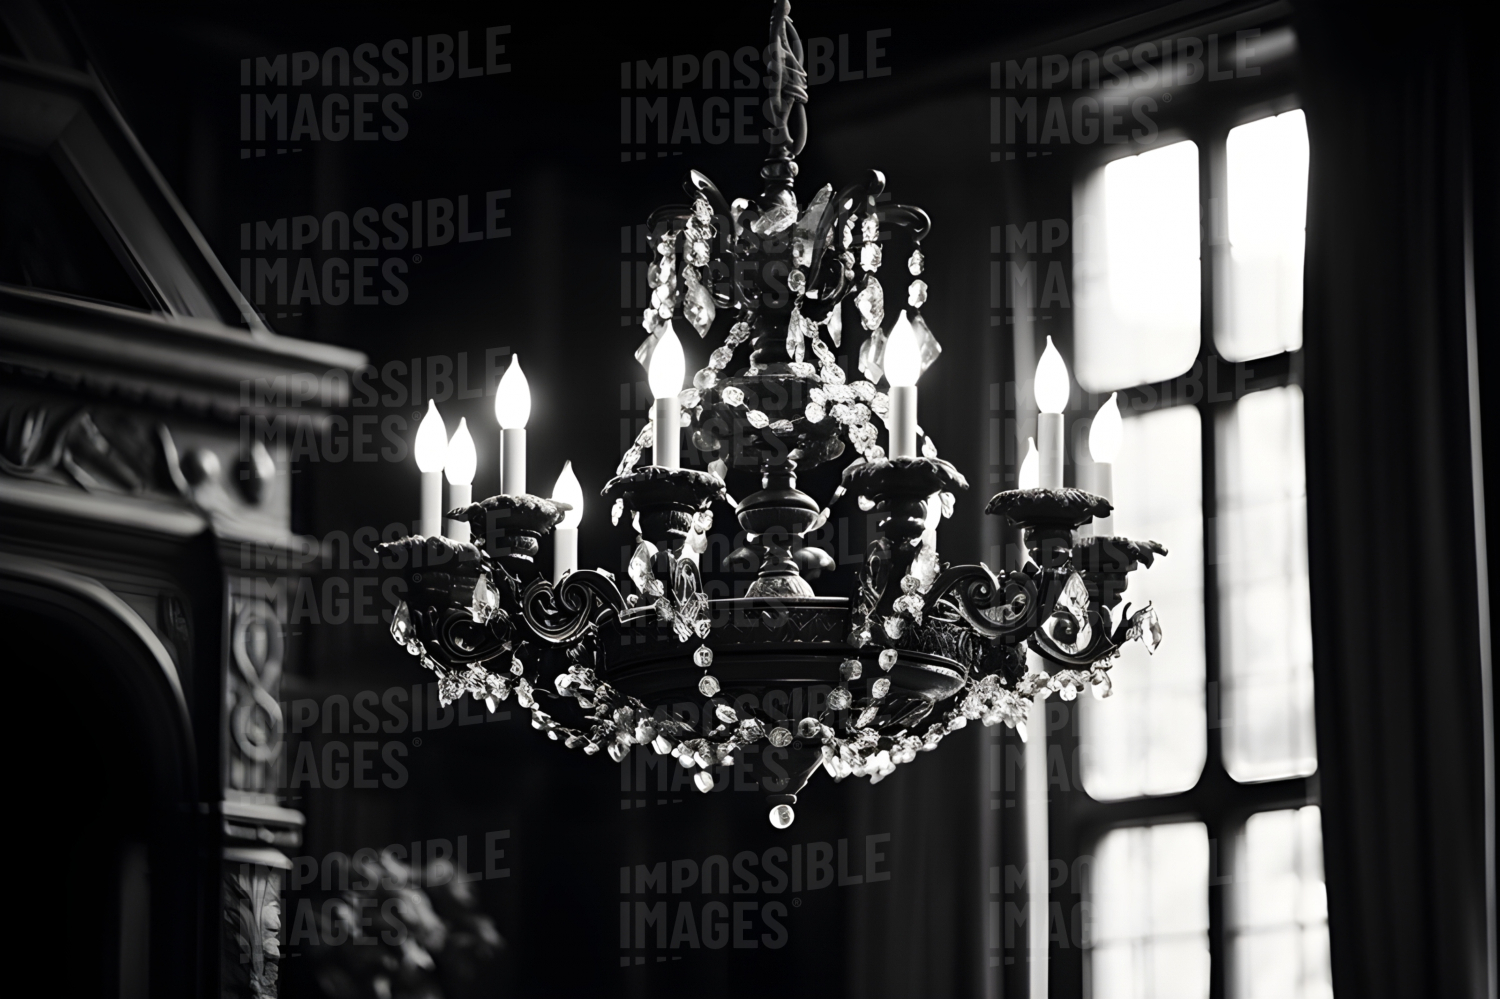 High contrastblack and white photo of an ornate chandelier hanging in the halway of a stately home